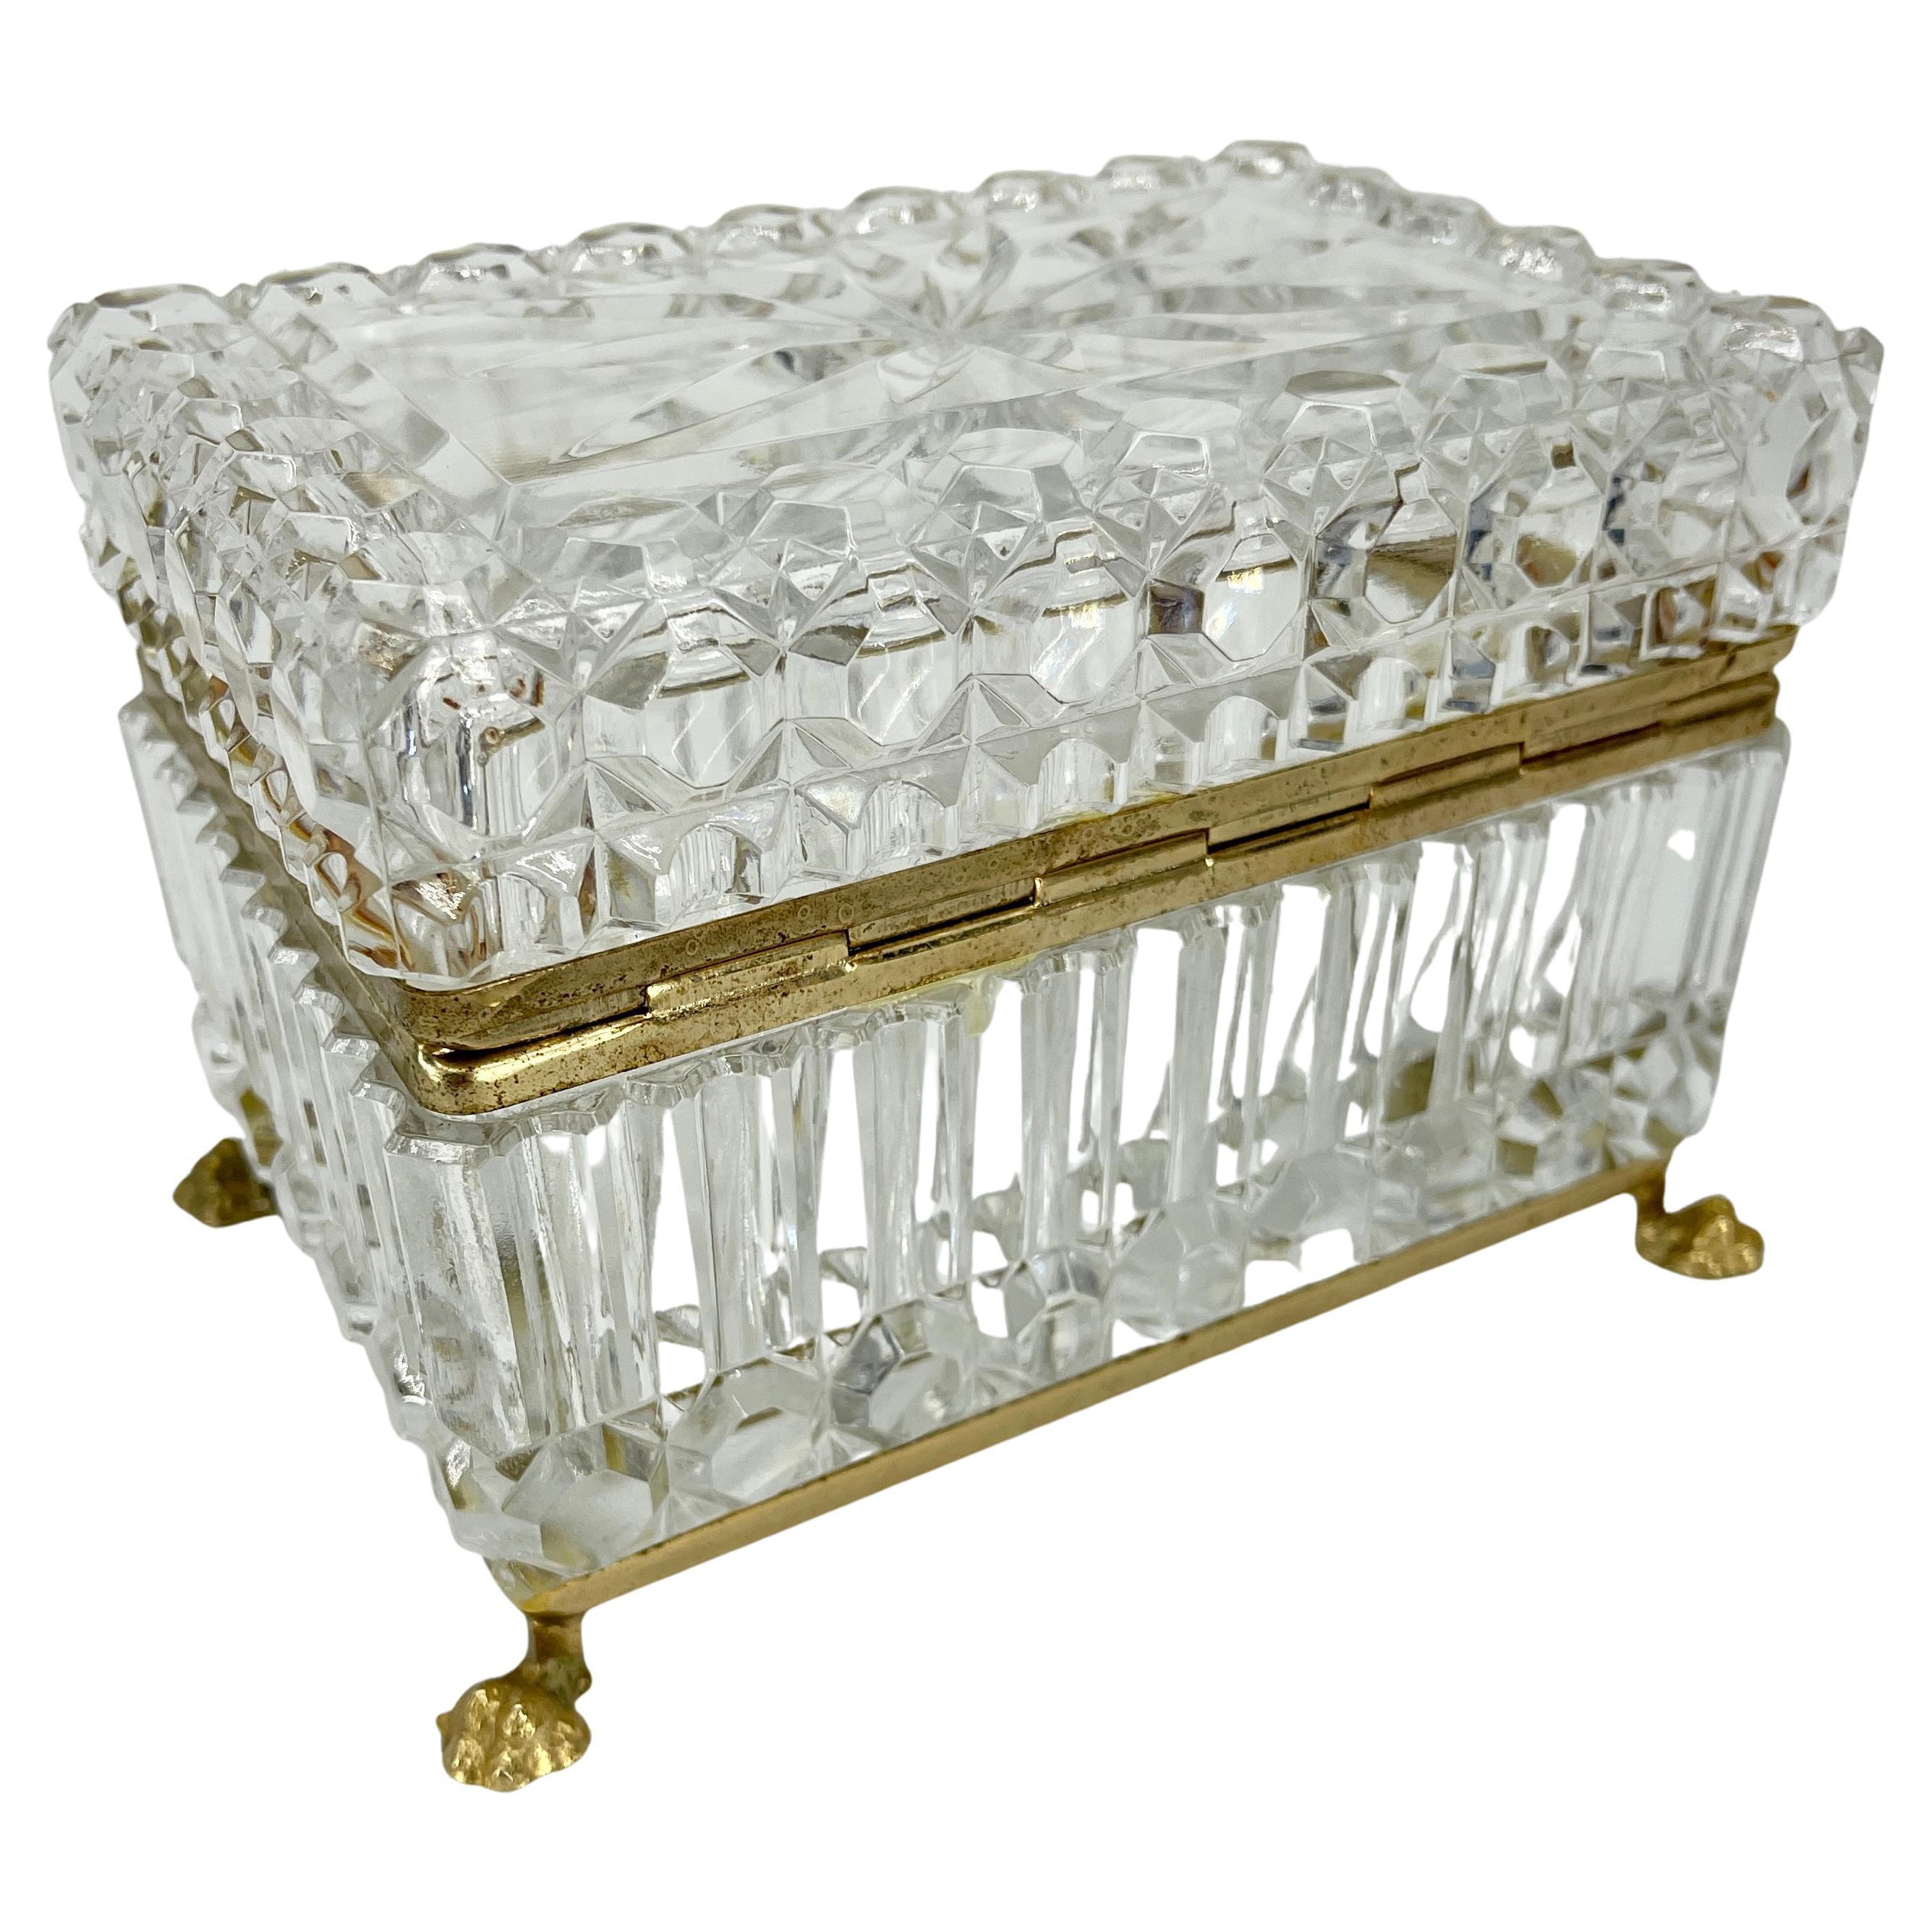 Mid-Century Modern Antique French Cut Crystal and Brass Jewelry Box, Vanity Box or Candy Dish